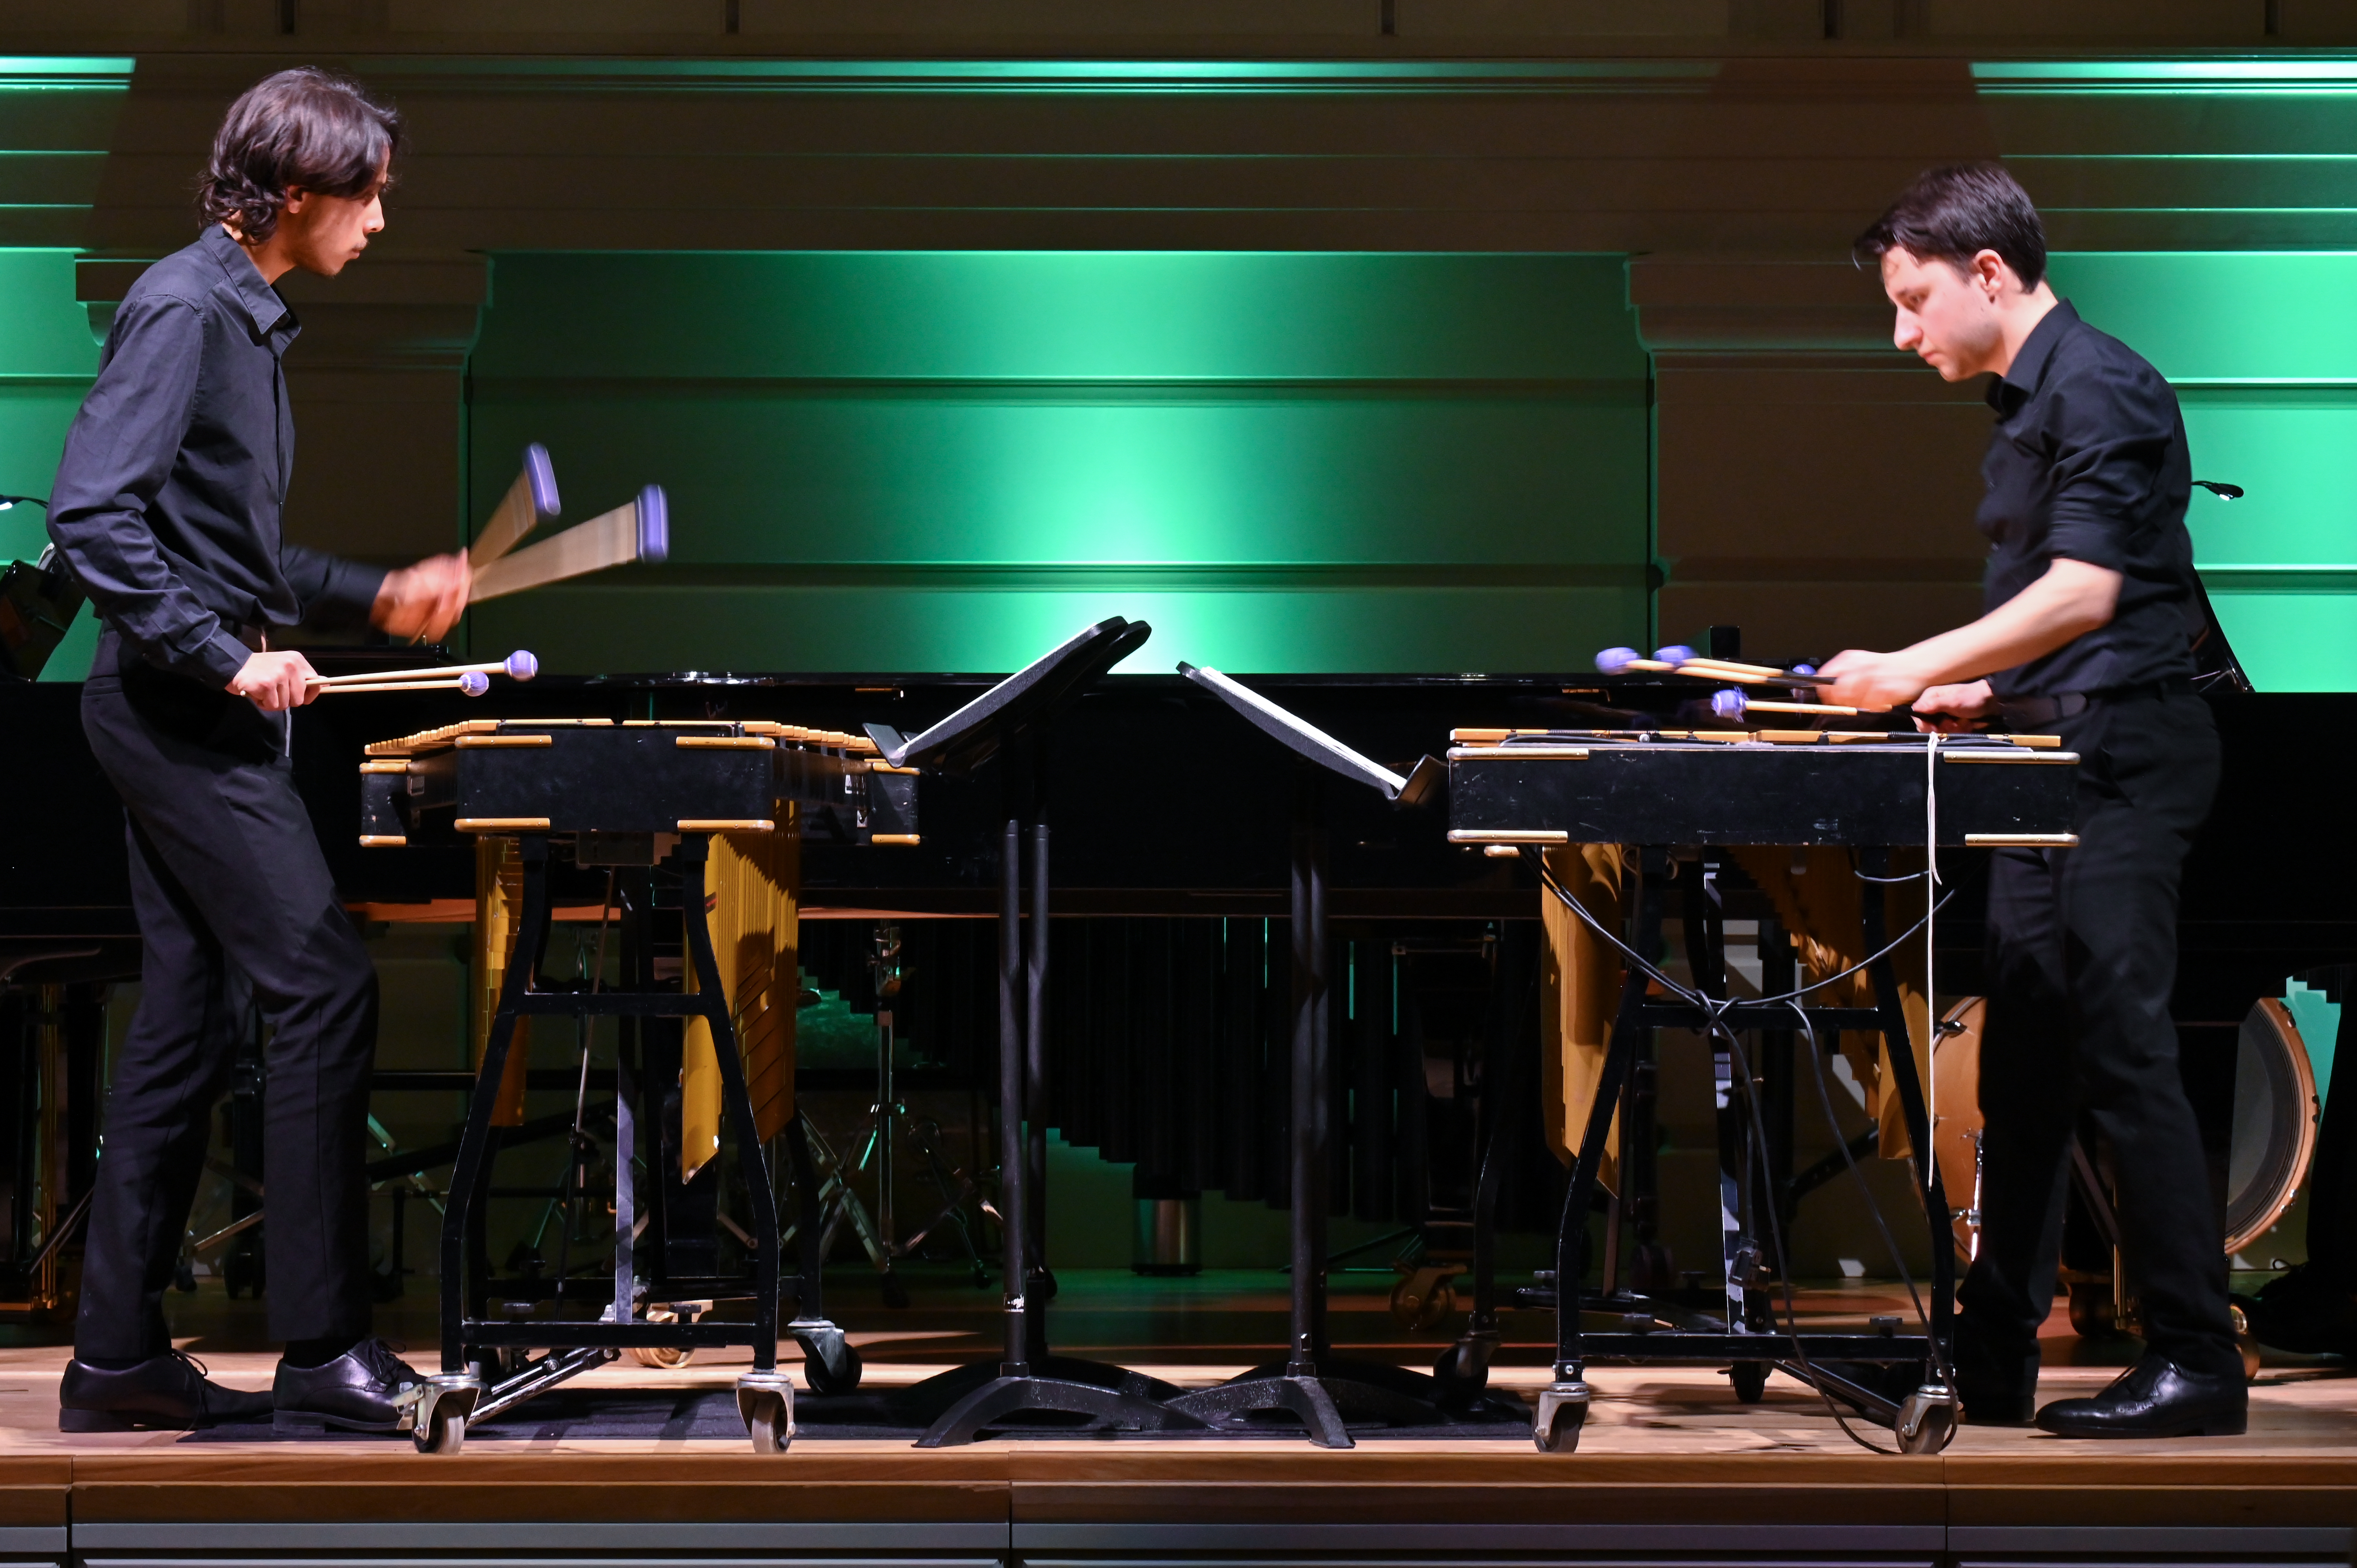 Two percussionists perform on drums on stage